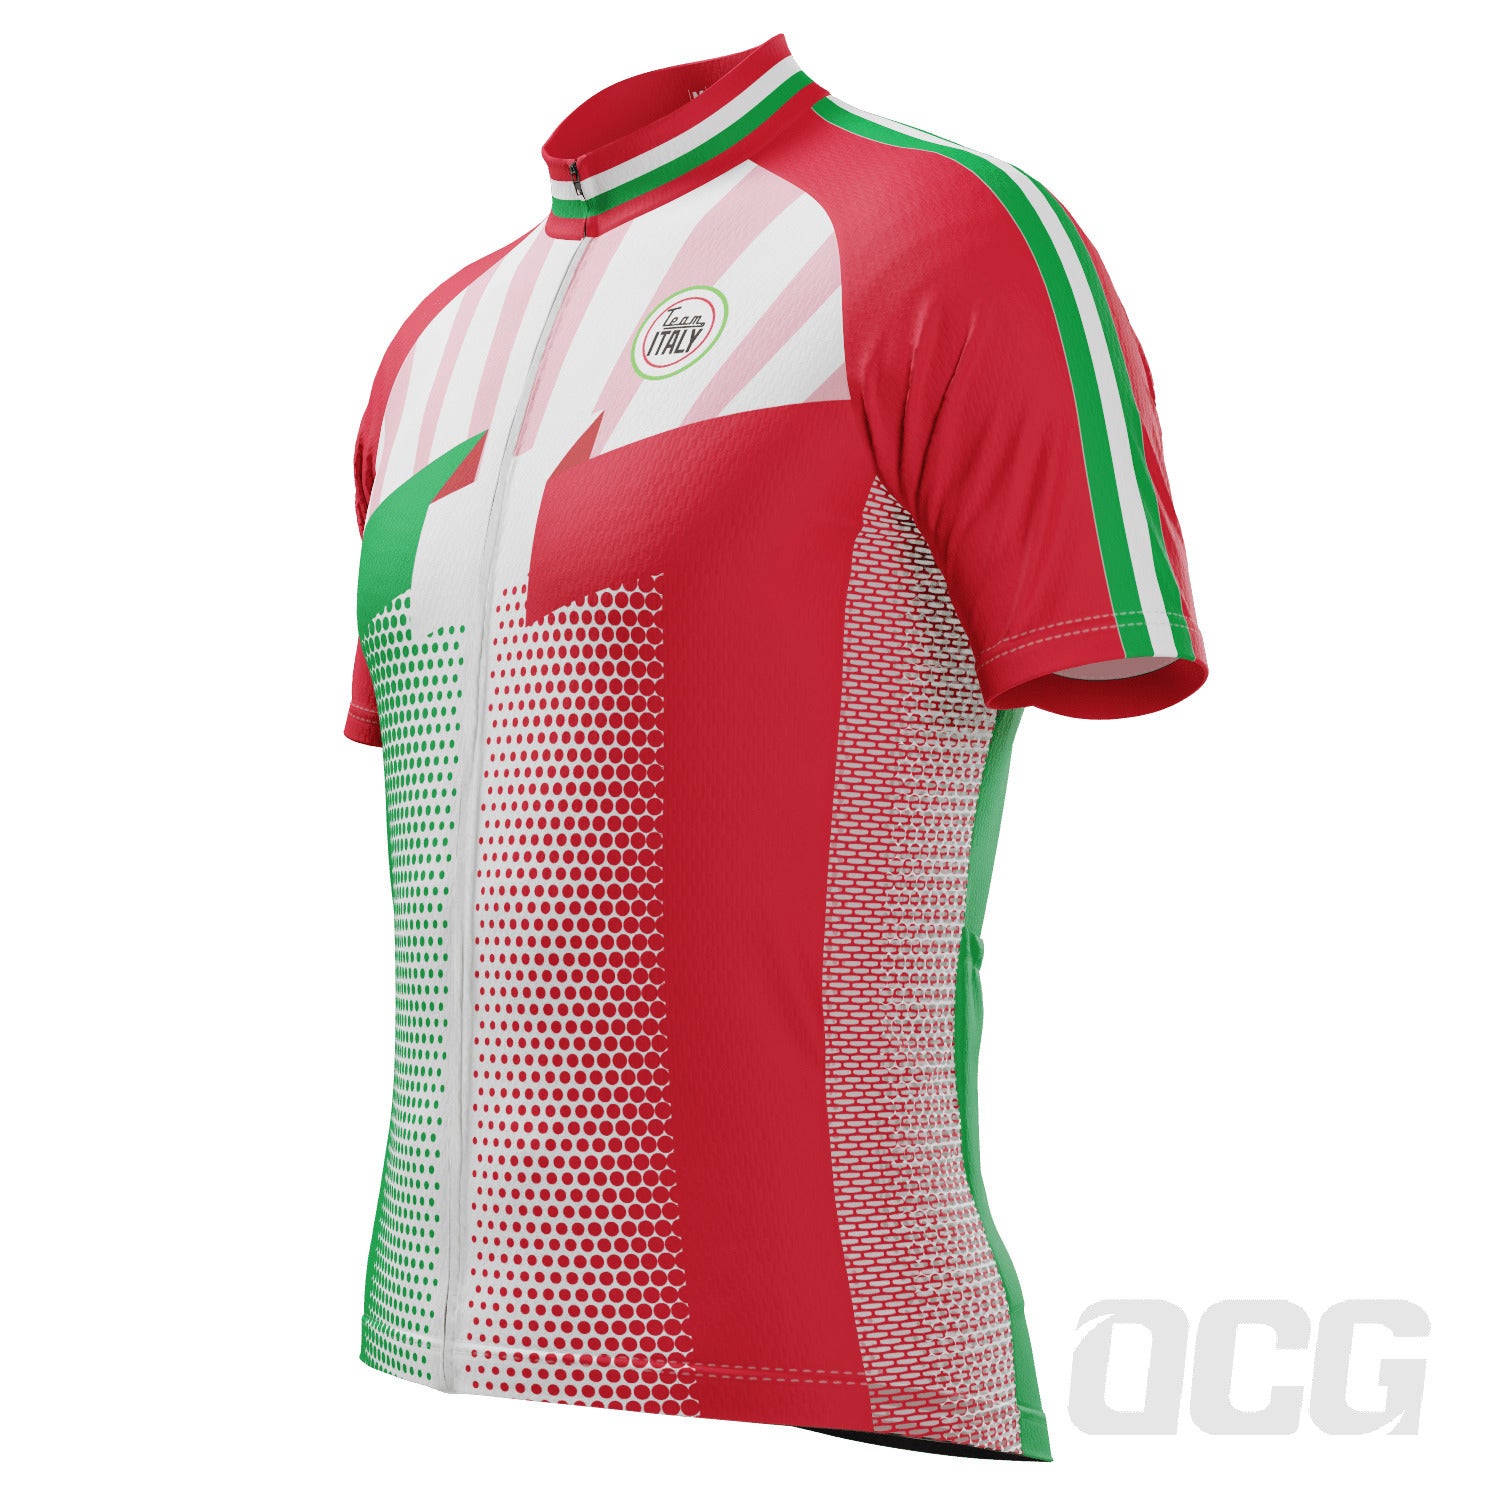 Men's World Countries Team Italy Icon Short Sleeve Cycling Jersey